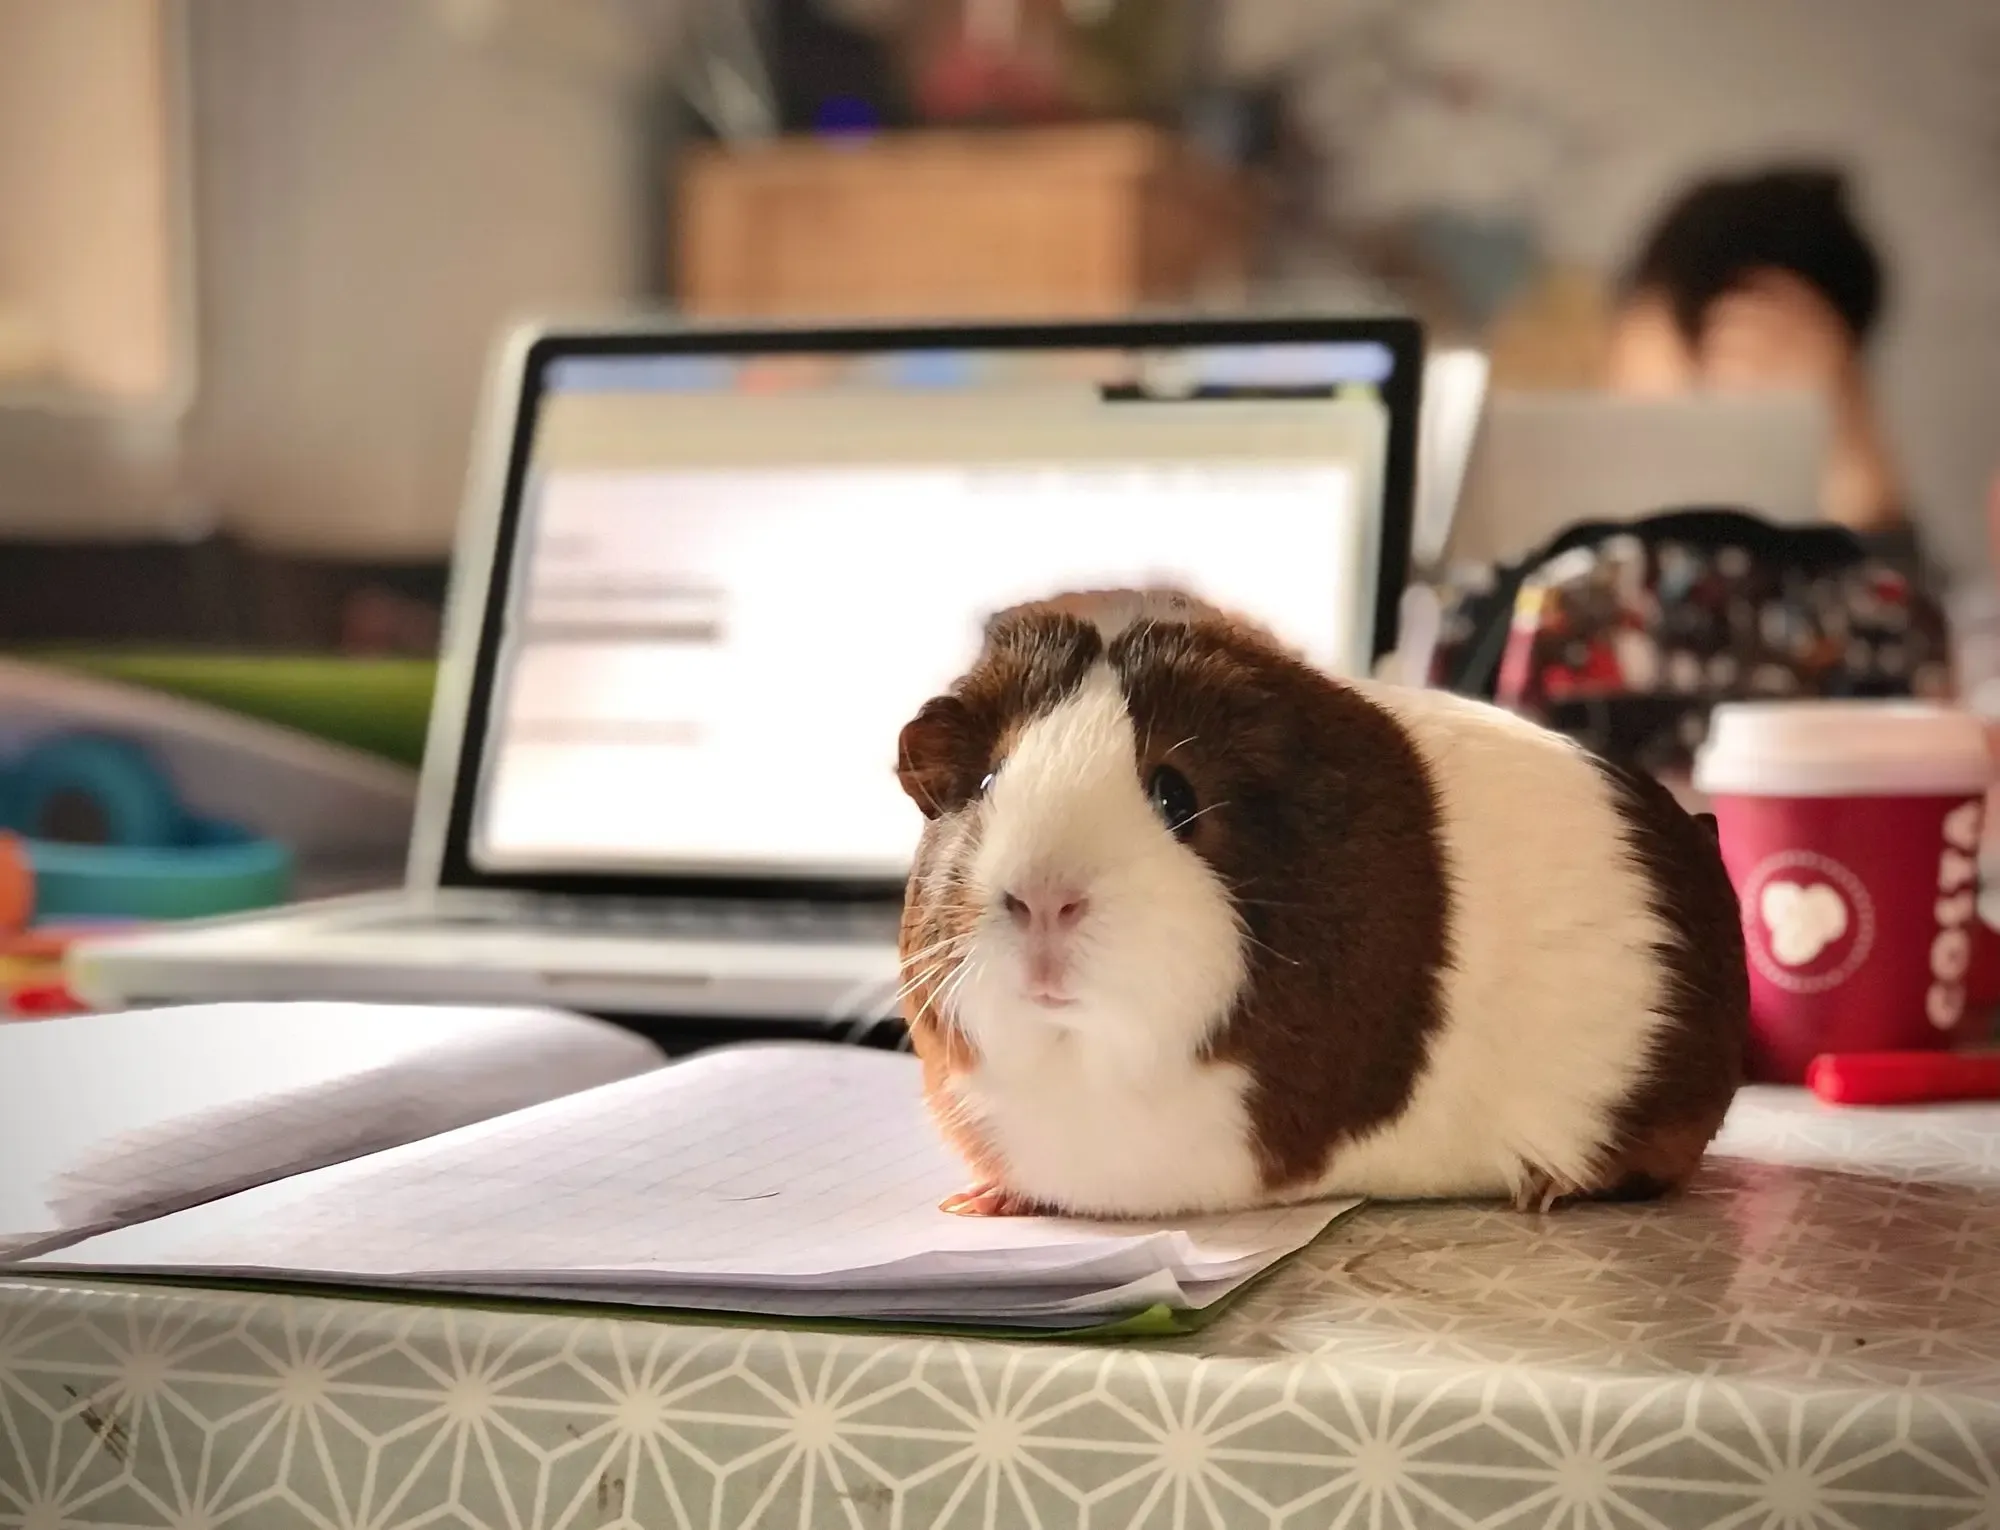 A hamster in remote workspace